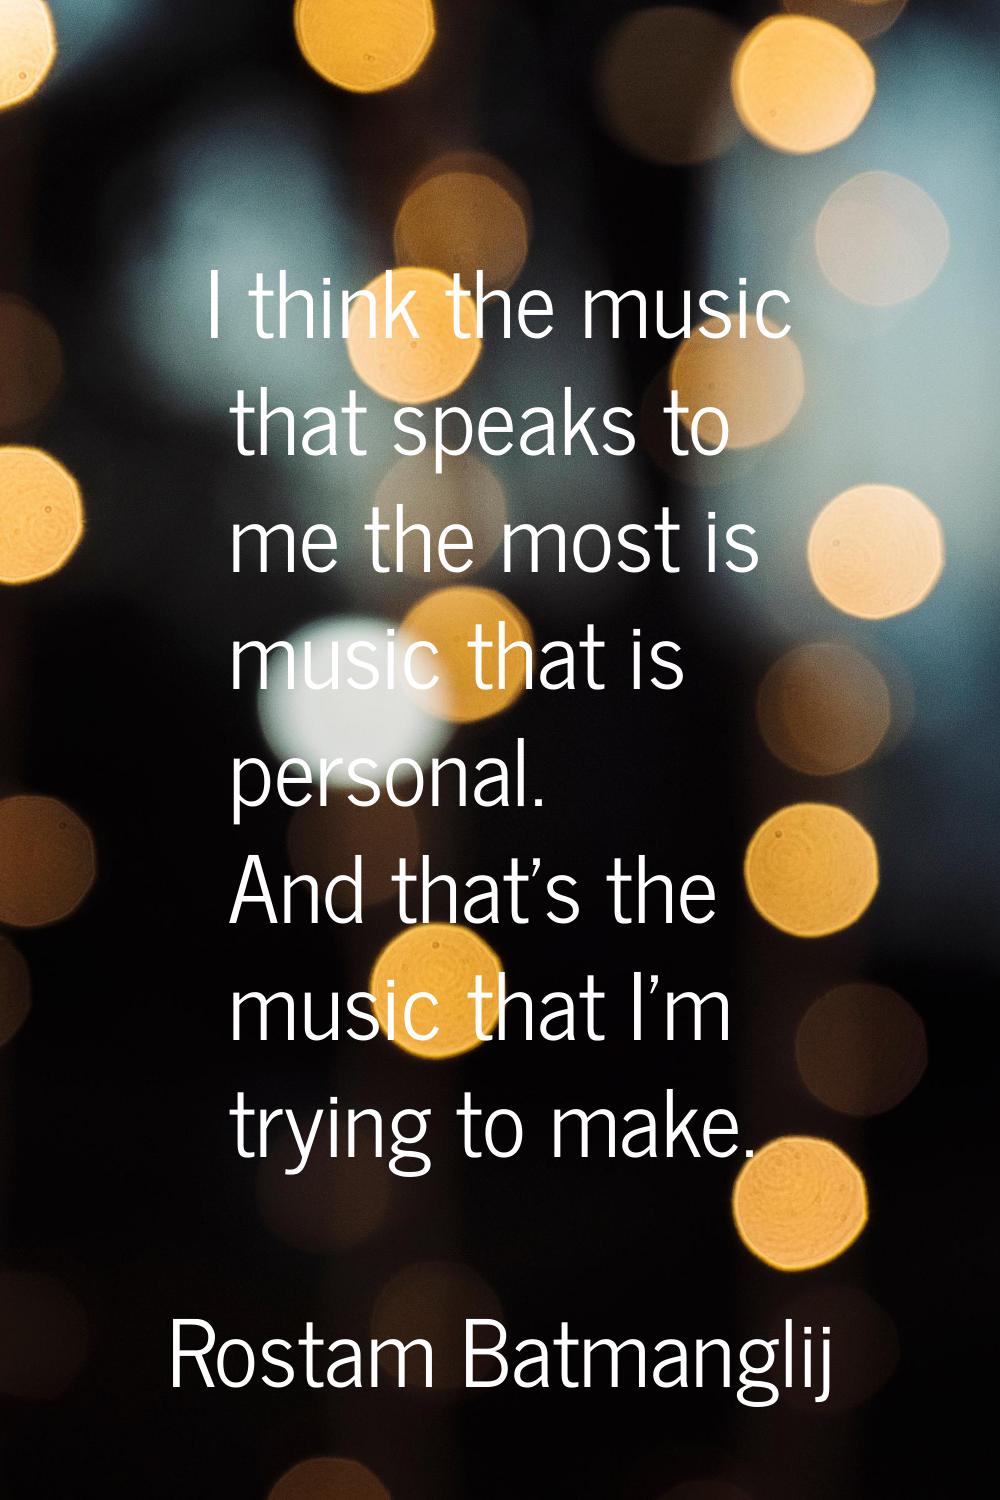 I think the music that speaks to me the most is music that is personal. And that's the music that I